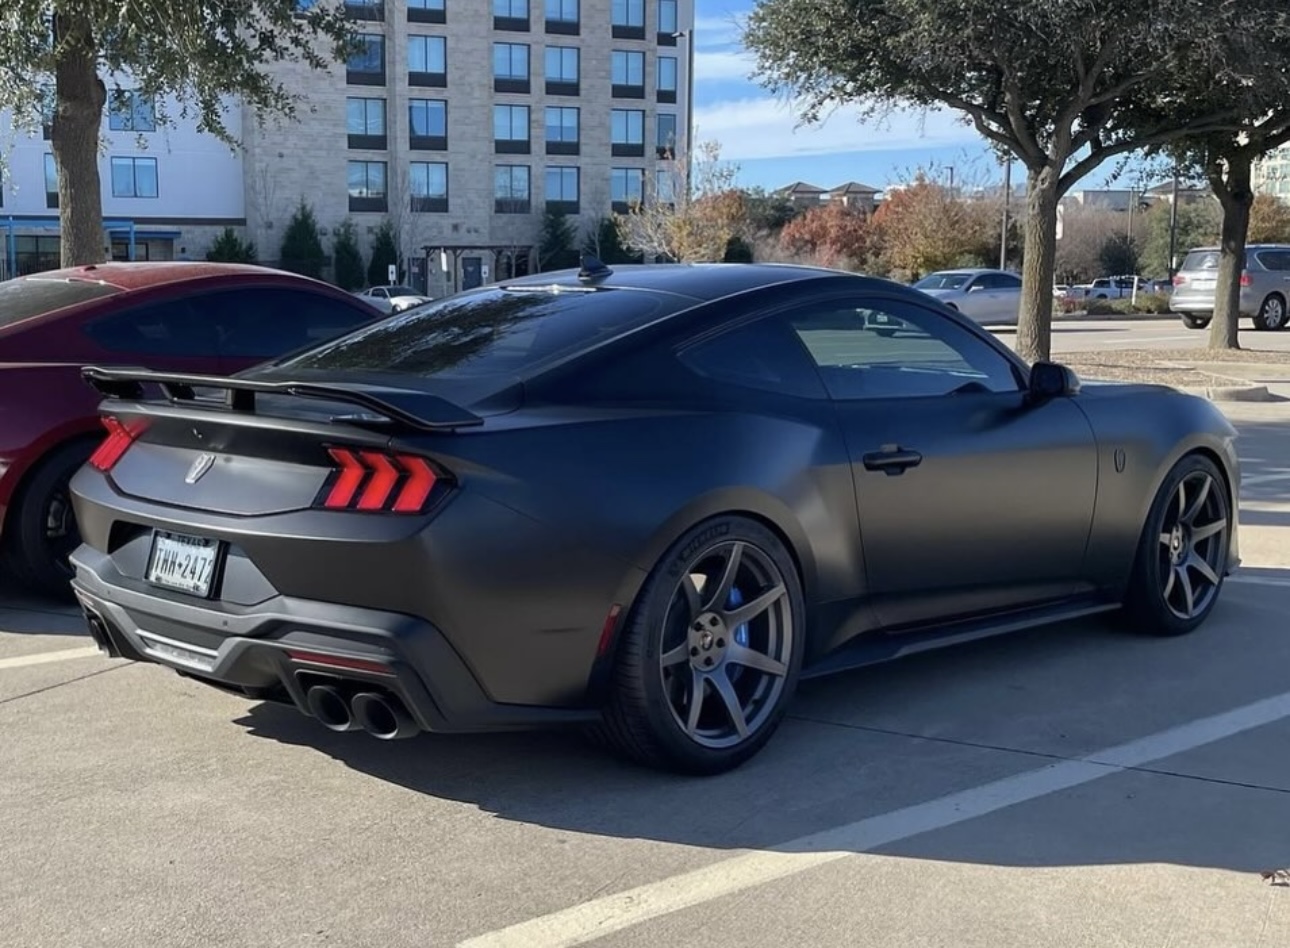 S650 Mustang Official S650 Dark Horse Aftermarket Wheel/Tire Thread! IMG_3103 (1)